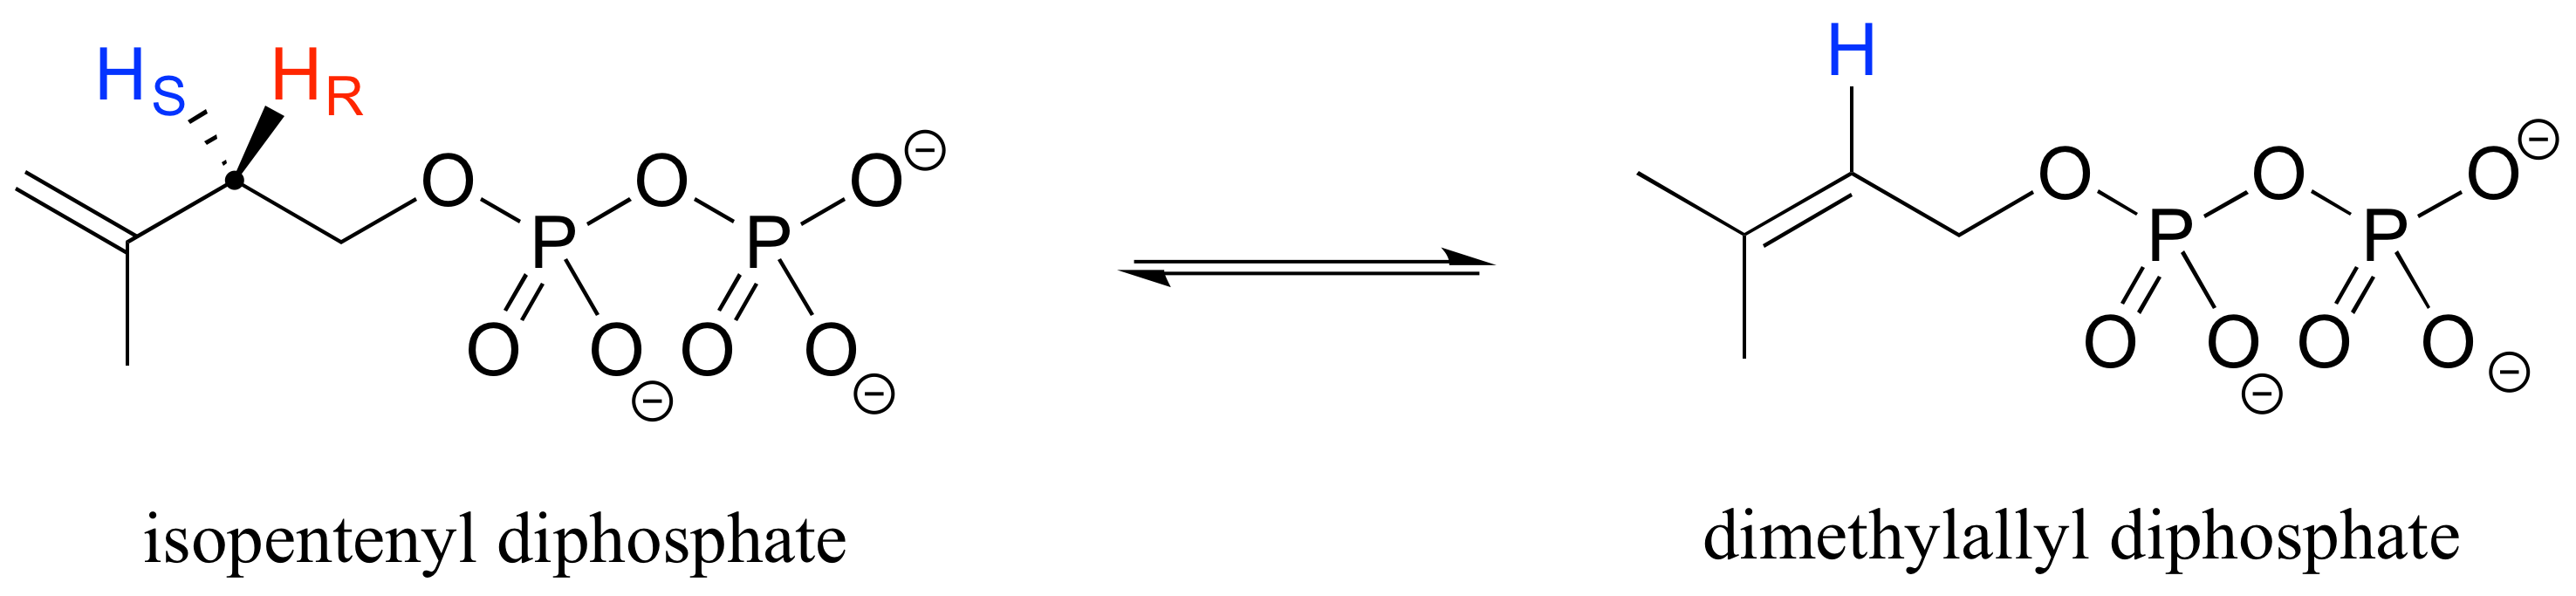 Isopentenyl diphosphate in equilibrium with dimethylallyl diphosphate. One hydrogen is removed and the alkene moves from carbons 1 and 2 to carbons 2 and 3.